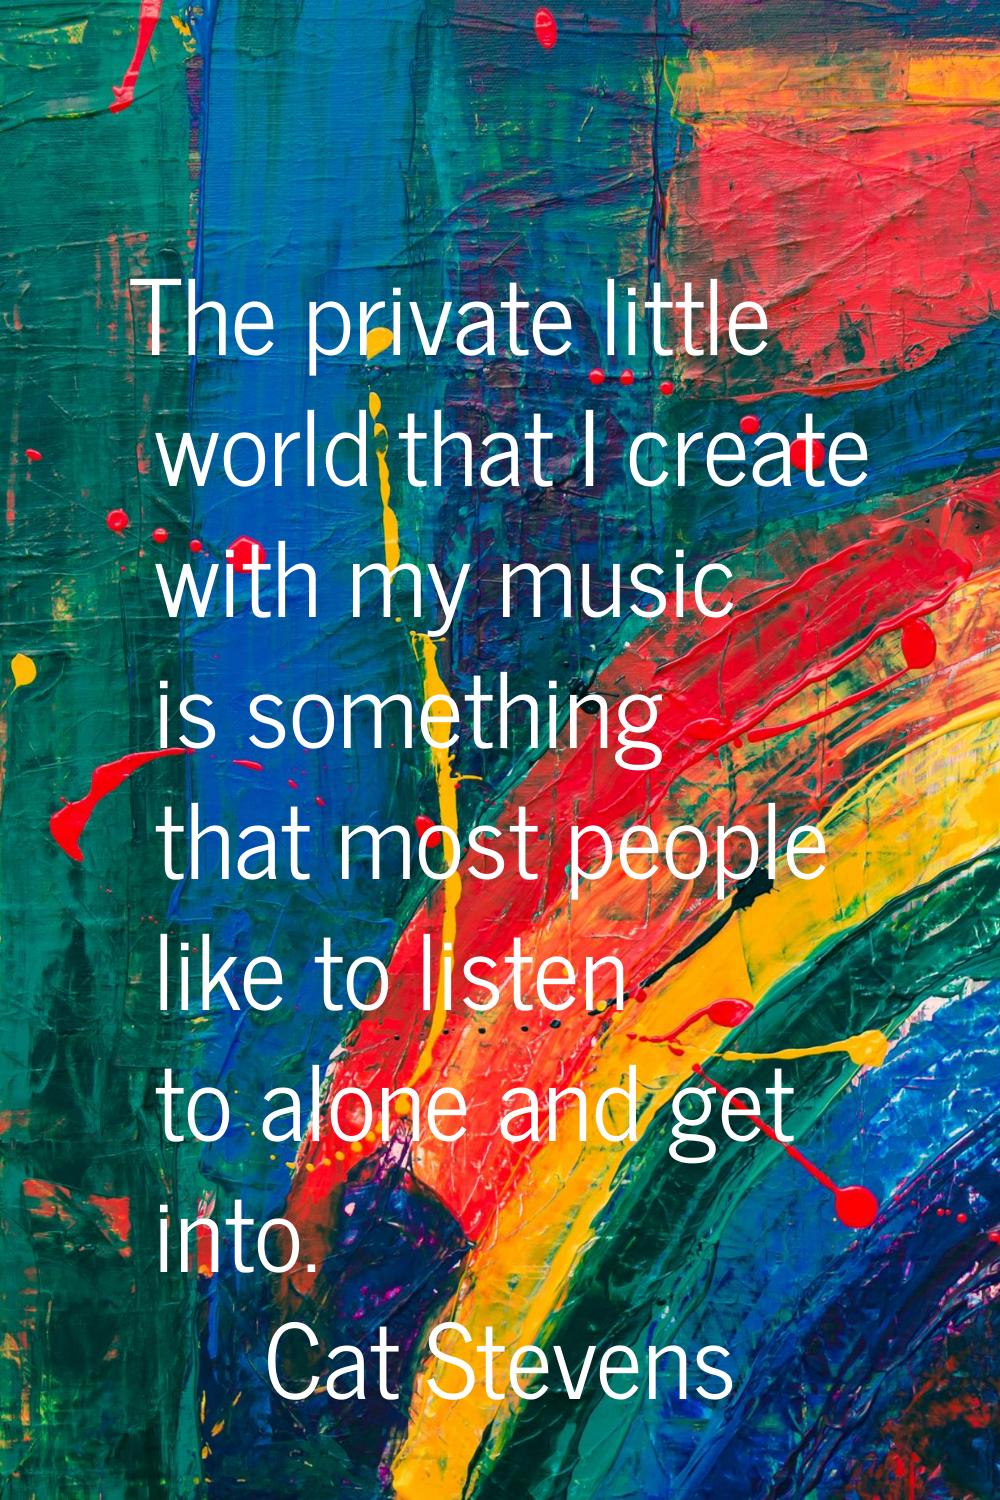 The private little world that I create with my music is something that most people like to listen t